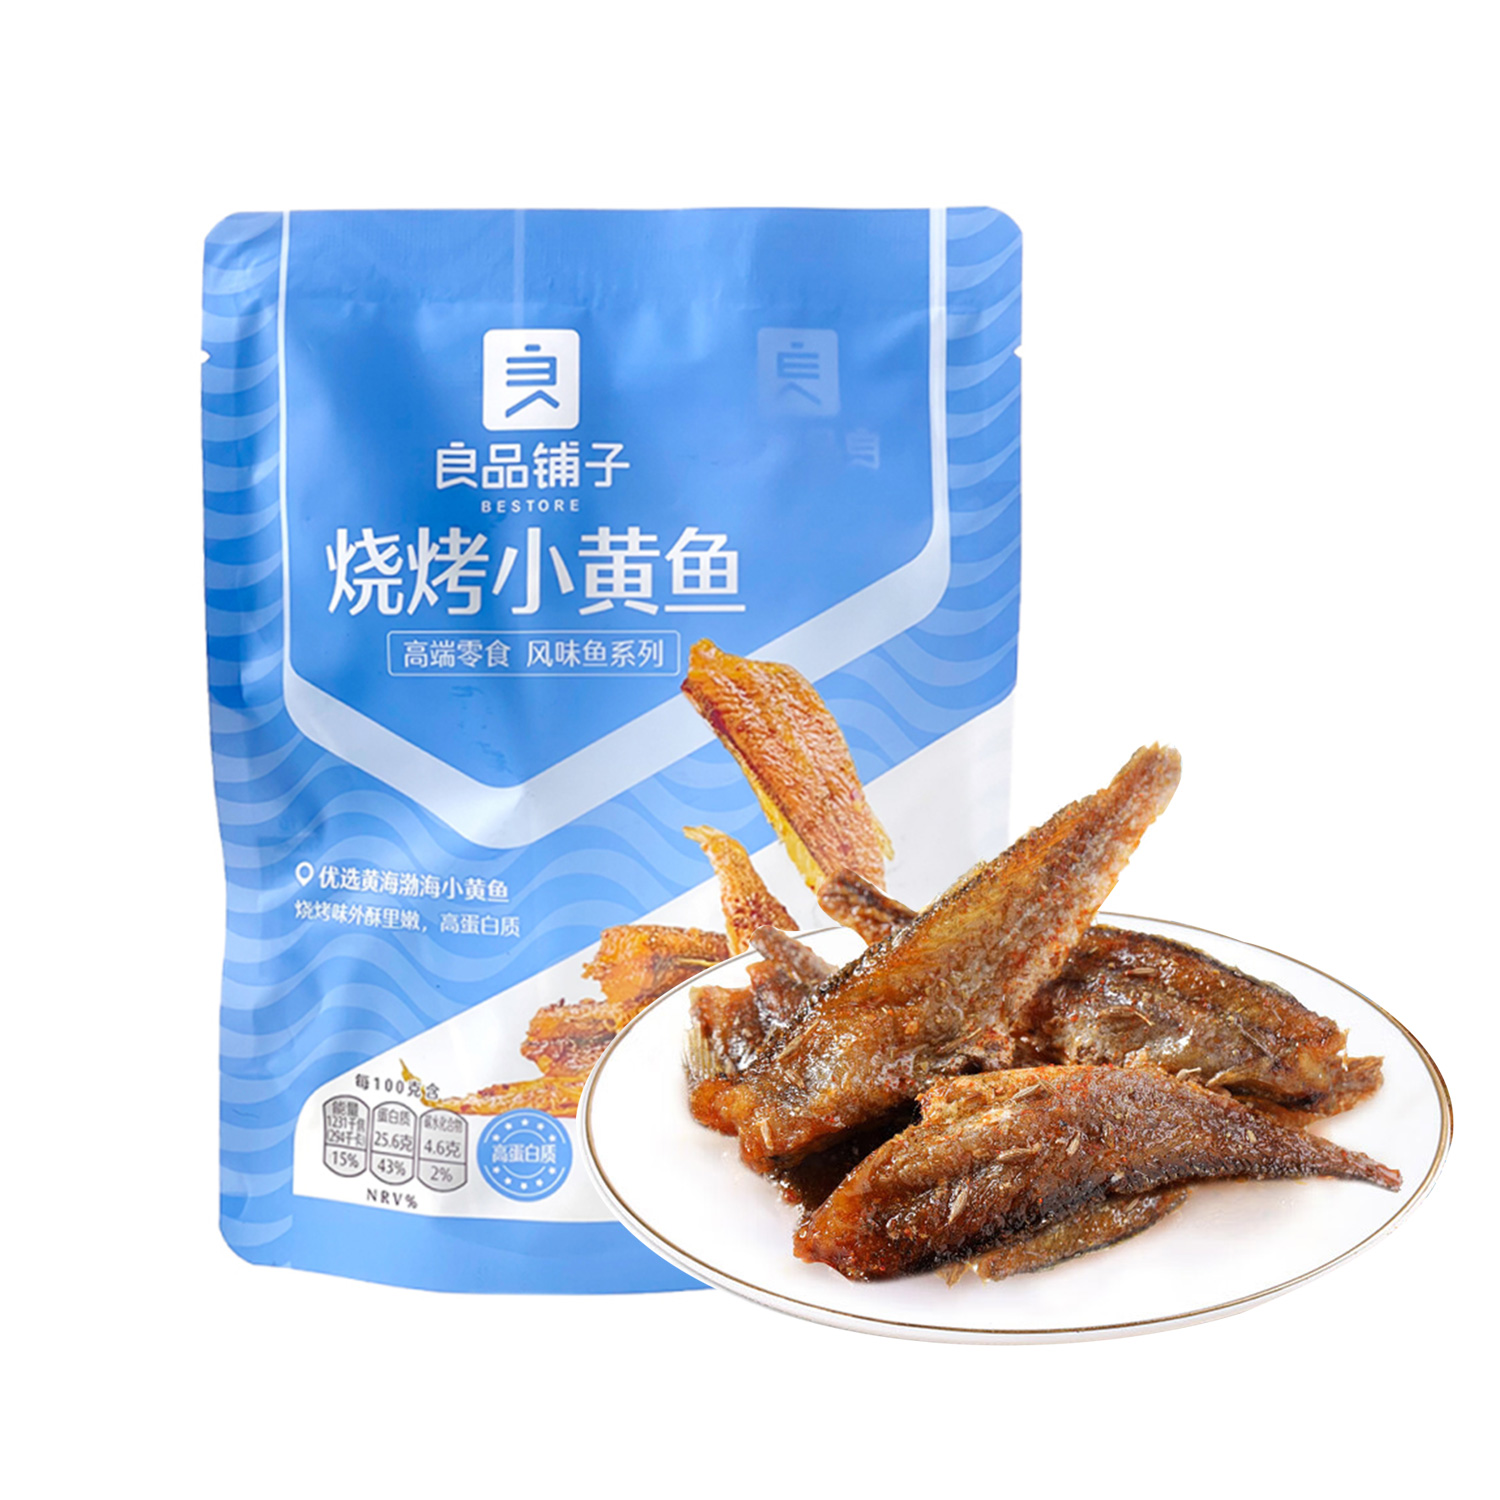 Bestore Grilled Small Yellow Croaker Snack 100g-eBest-Jerky,Snacks & Confectionery